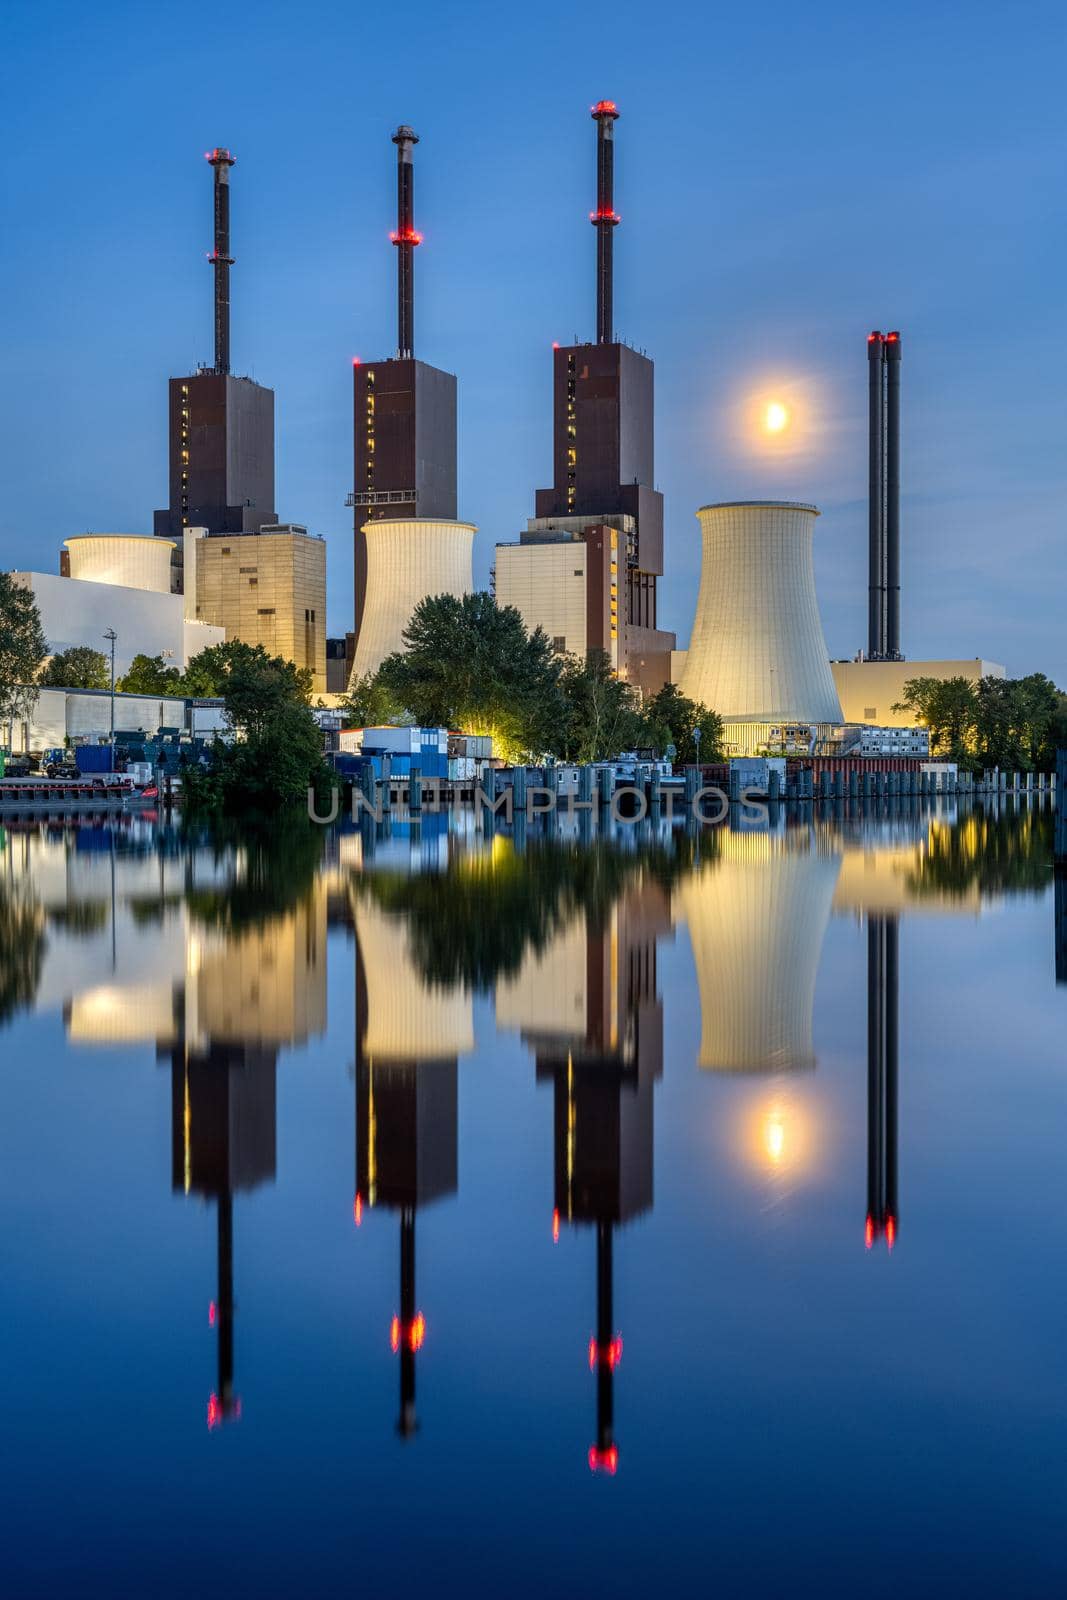 A thermal power station in Berlin at dusk reflected in a canal